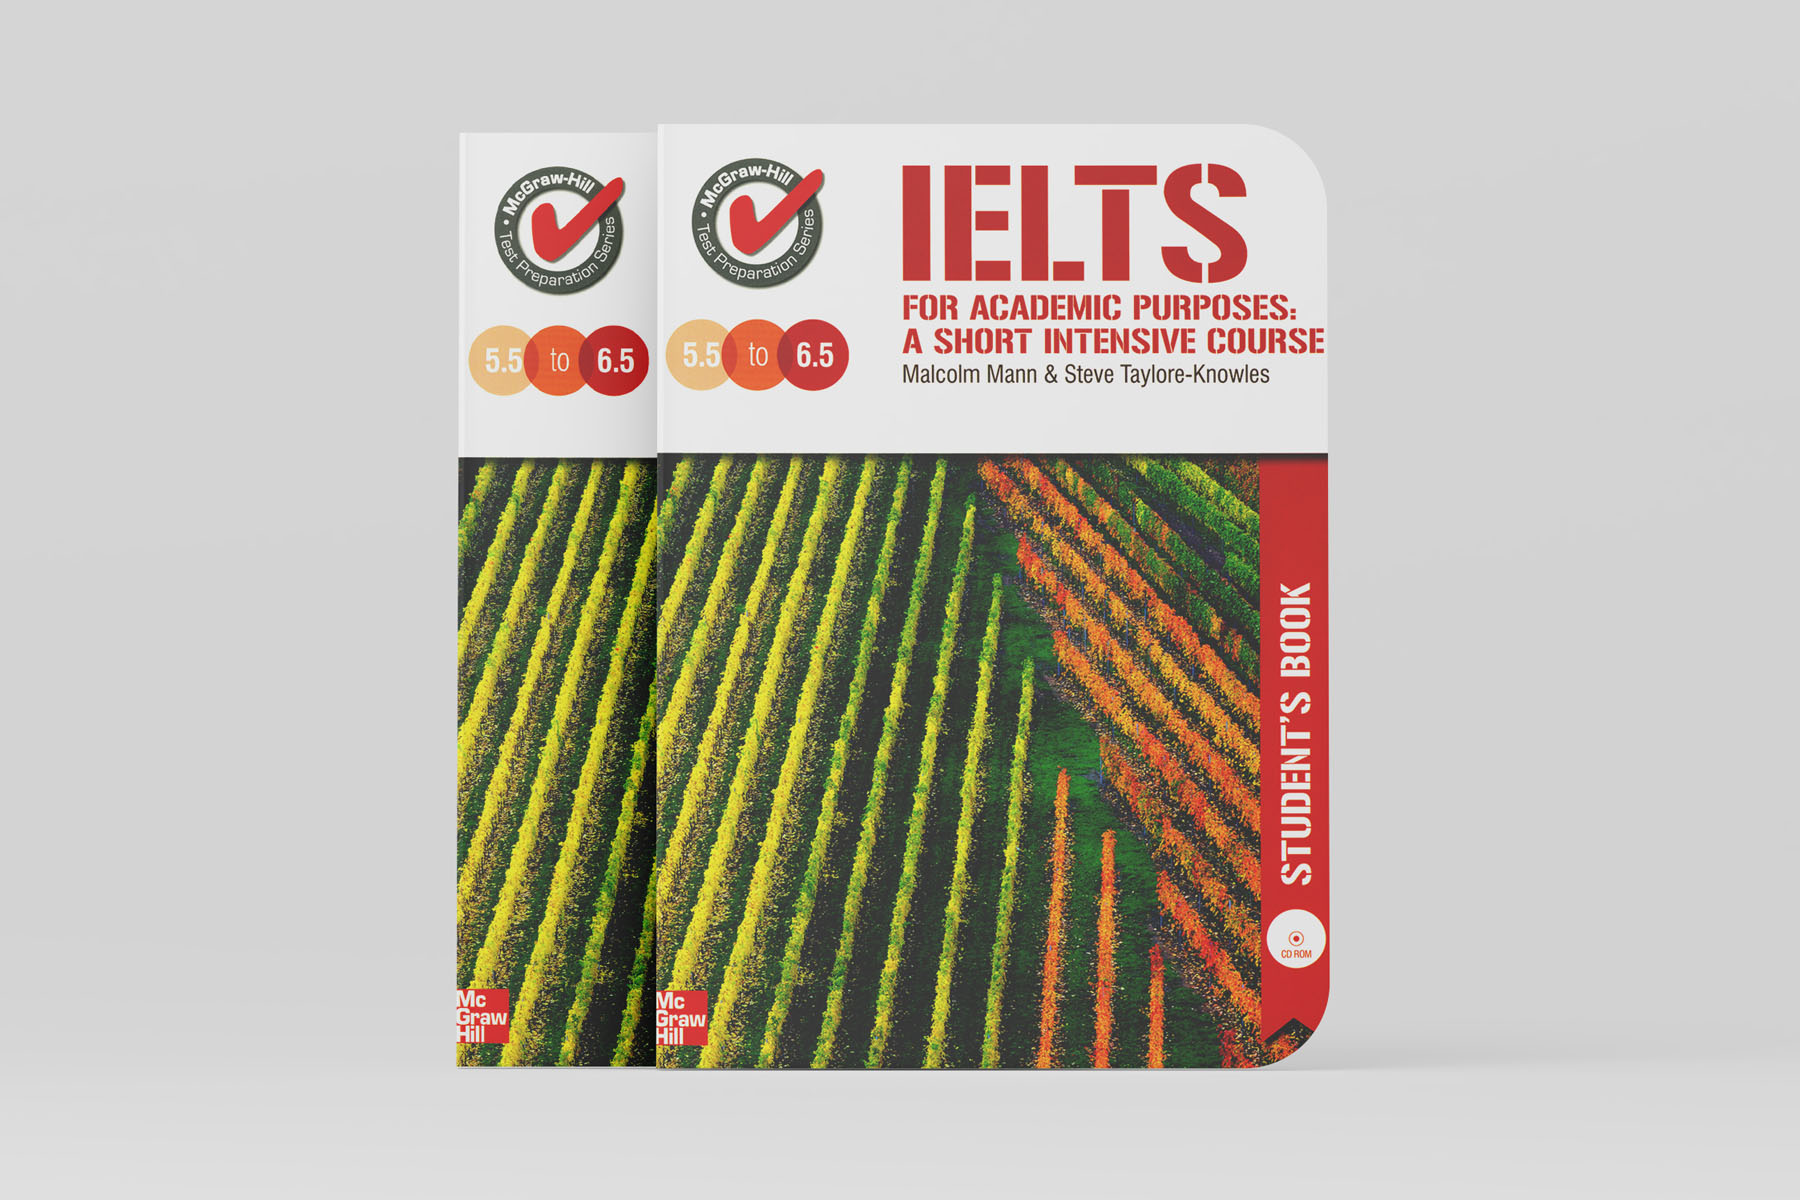 IELTS for Academic Purposes: a short intensive course